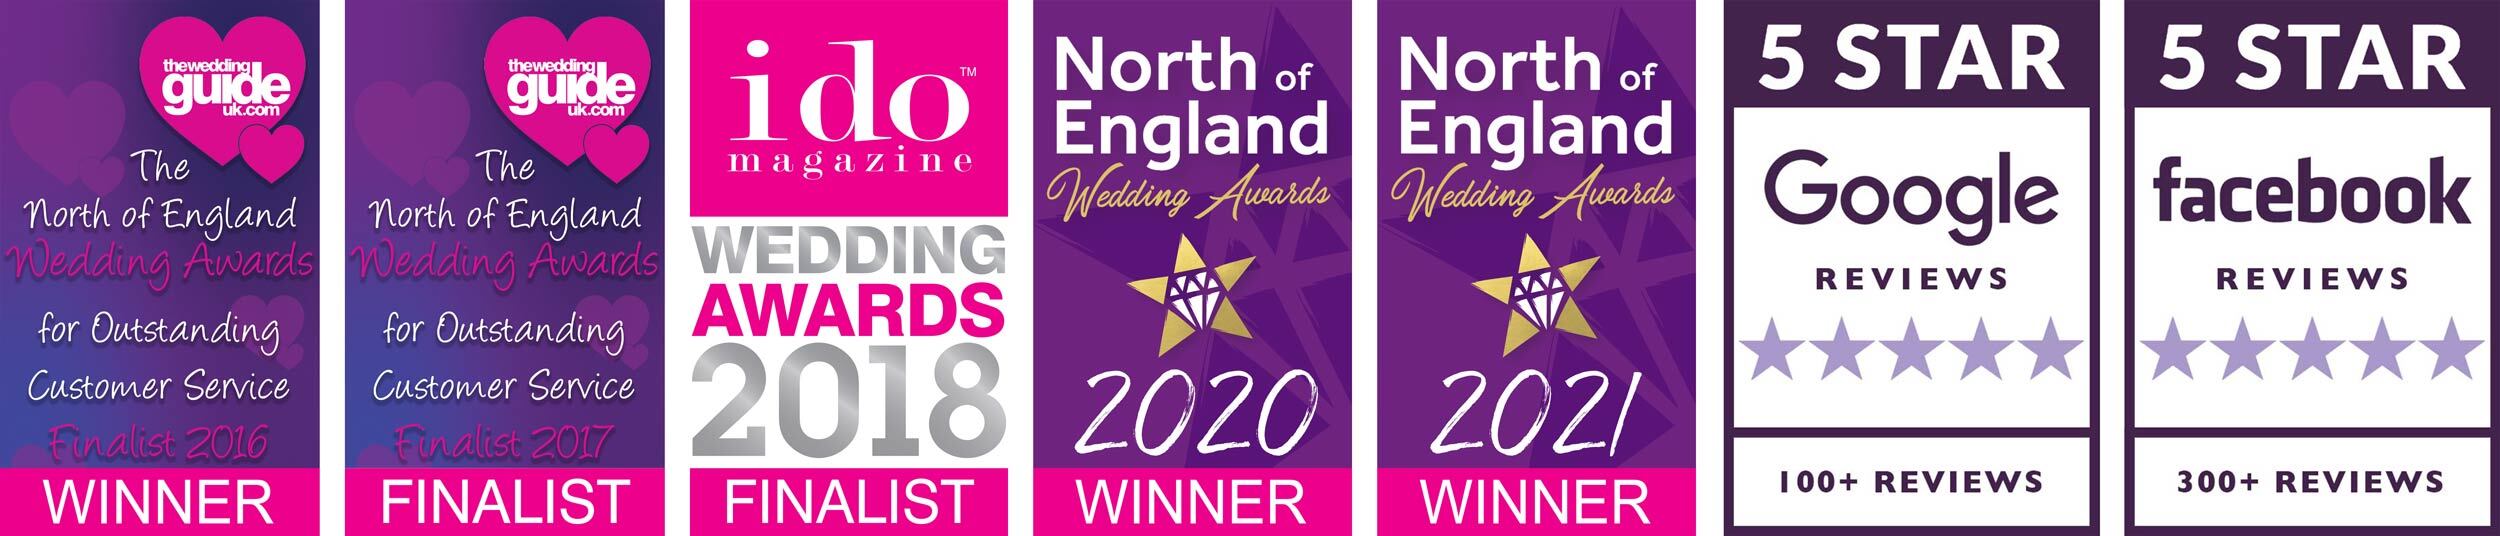 Our awards, nominations and 5 star reviews